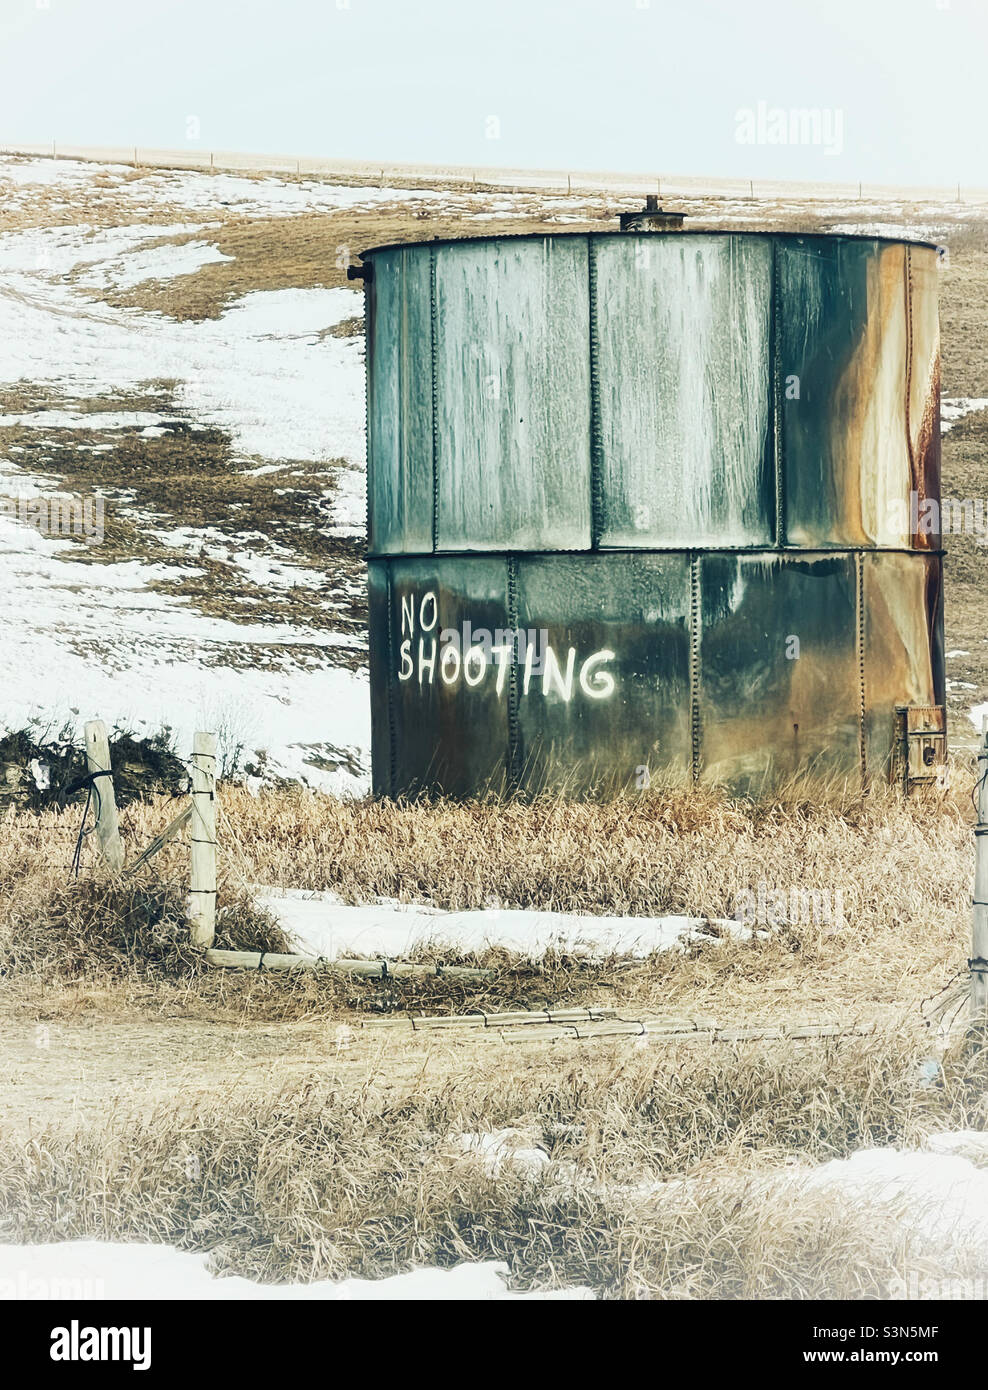 Large storage drum with “No Shooting” painted on the outside. Shot in the foothills, near Calgary, Alberta, Canada. Stock Photo